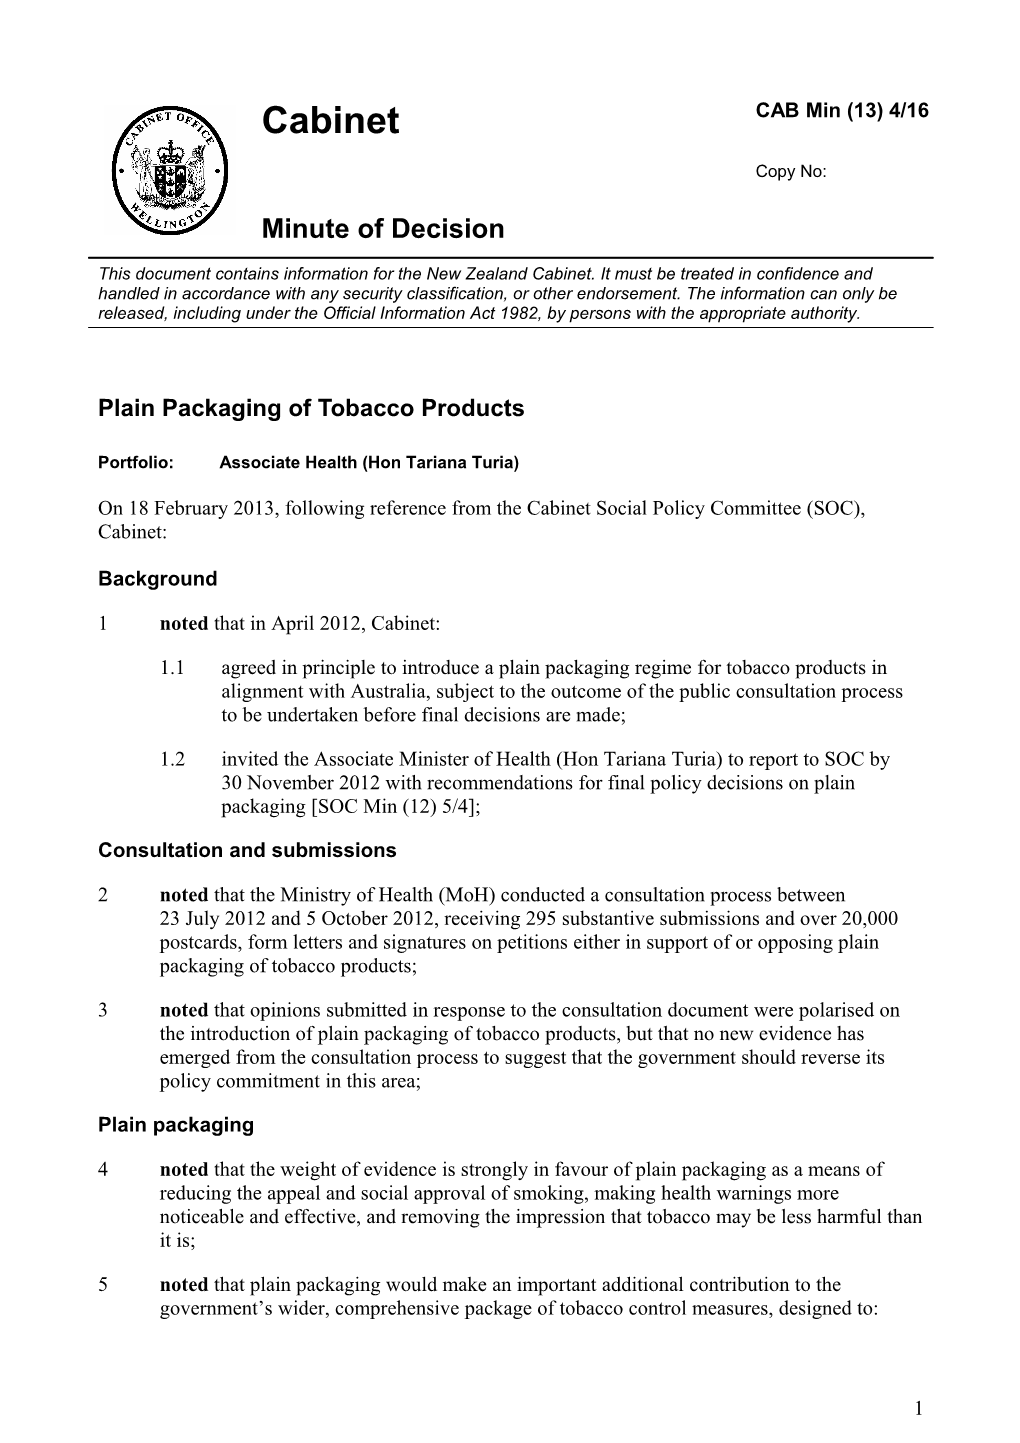 Plain Packaging of Tobacco Products